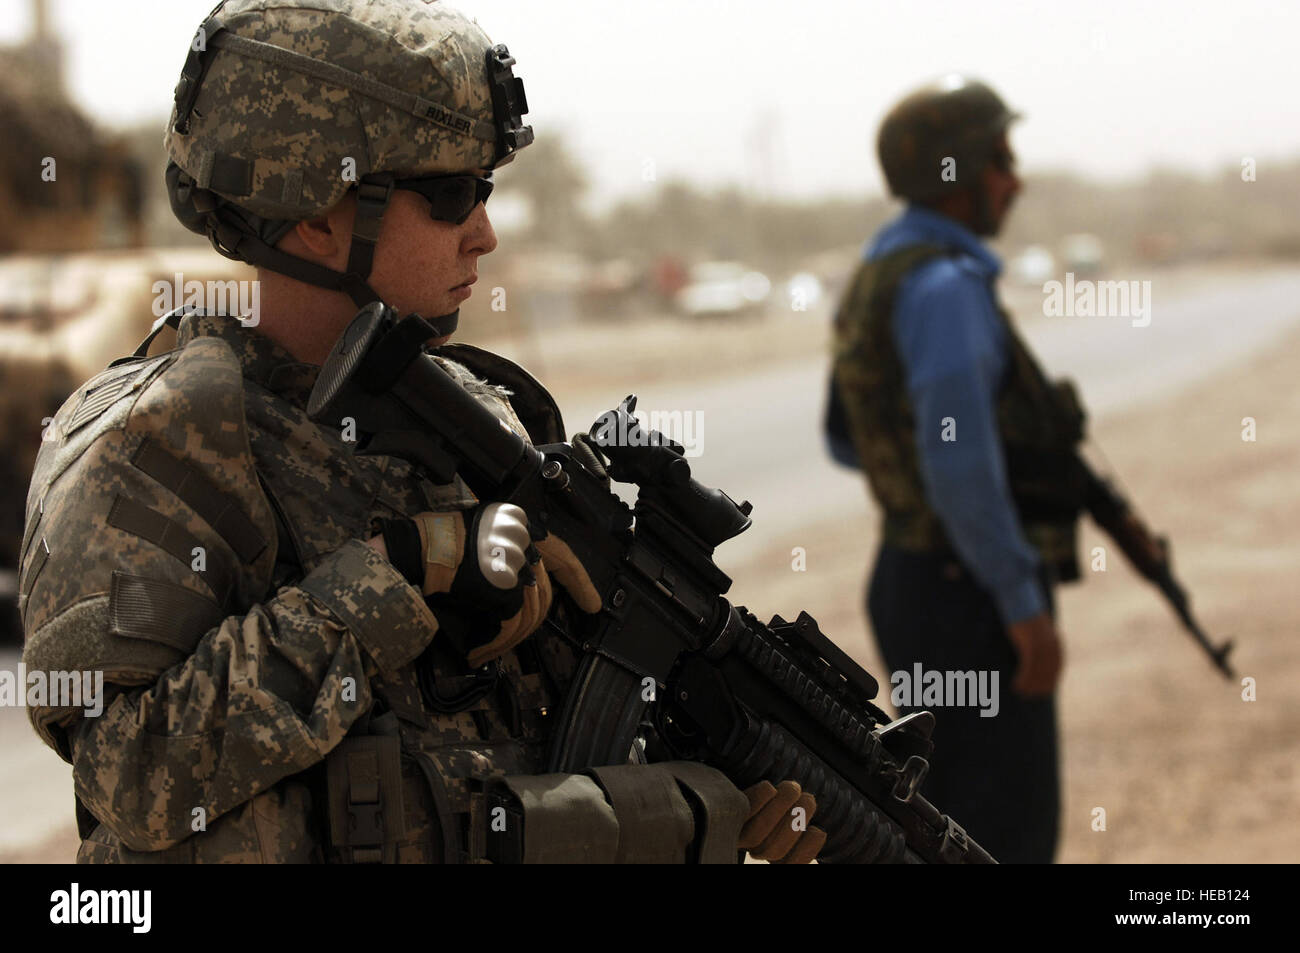 U.S. Army 2nd Lt. Stacy Bixler, a platoon leader from 411th Military Police Company, 716th Military Police Battalion, 101st Airborne Division, provides roadside security with Iraqi police during a dismounted patrol through Meshahdah, Iraq, on April 8, 2008. Tech. Sgt. William Greer) Stock Photo